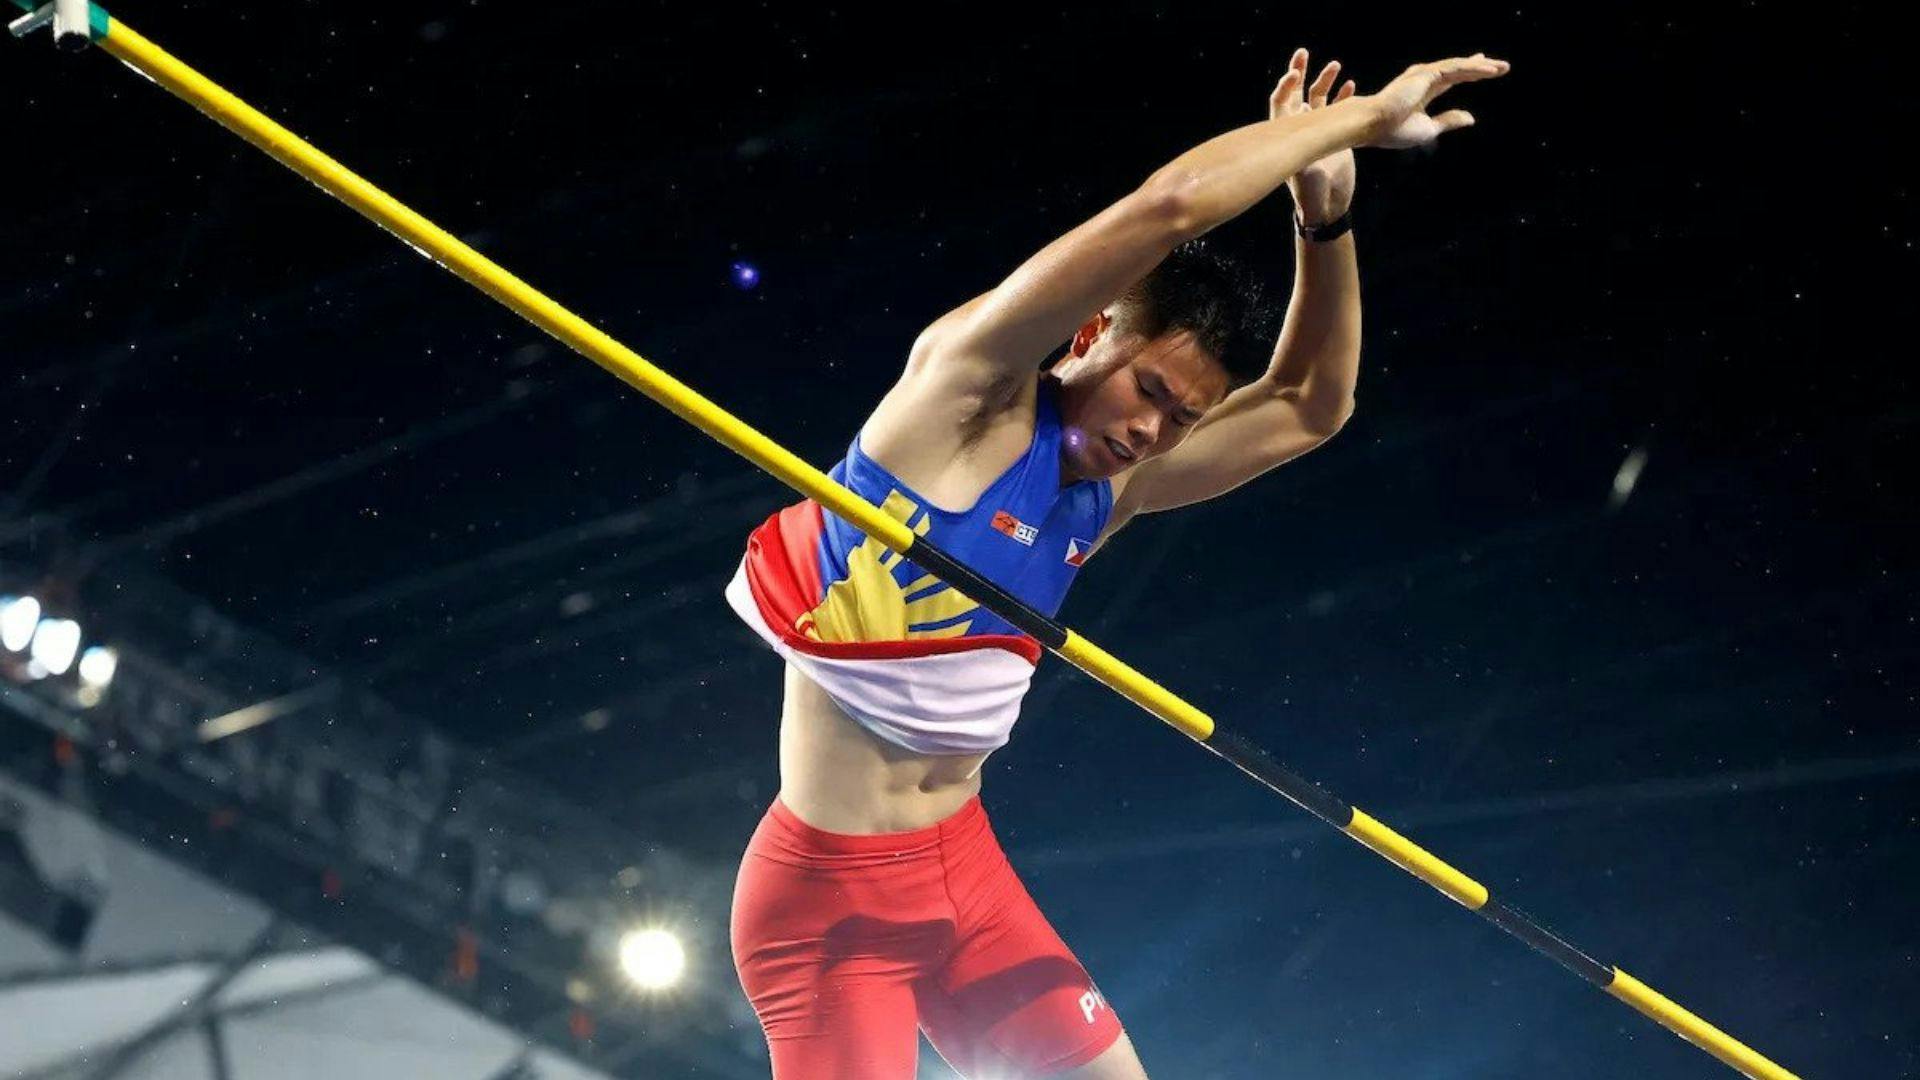 Pole vaulter EJ Obiena sends sweet message to girlfriend for anniversary